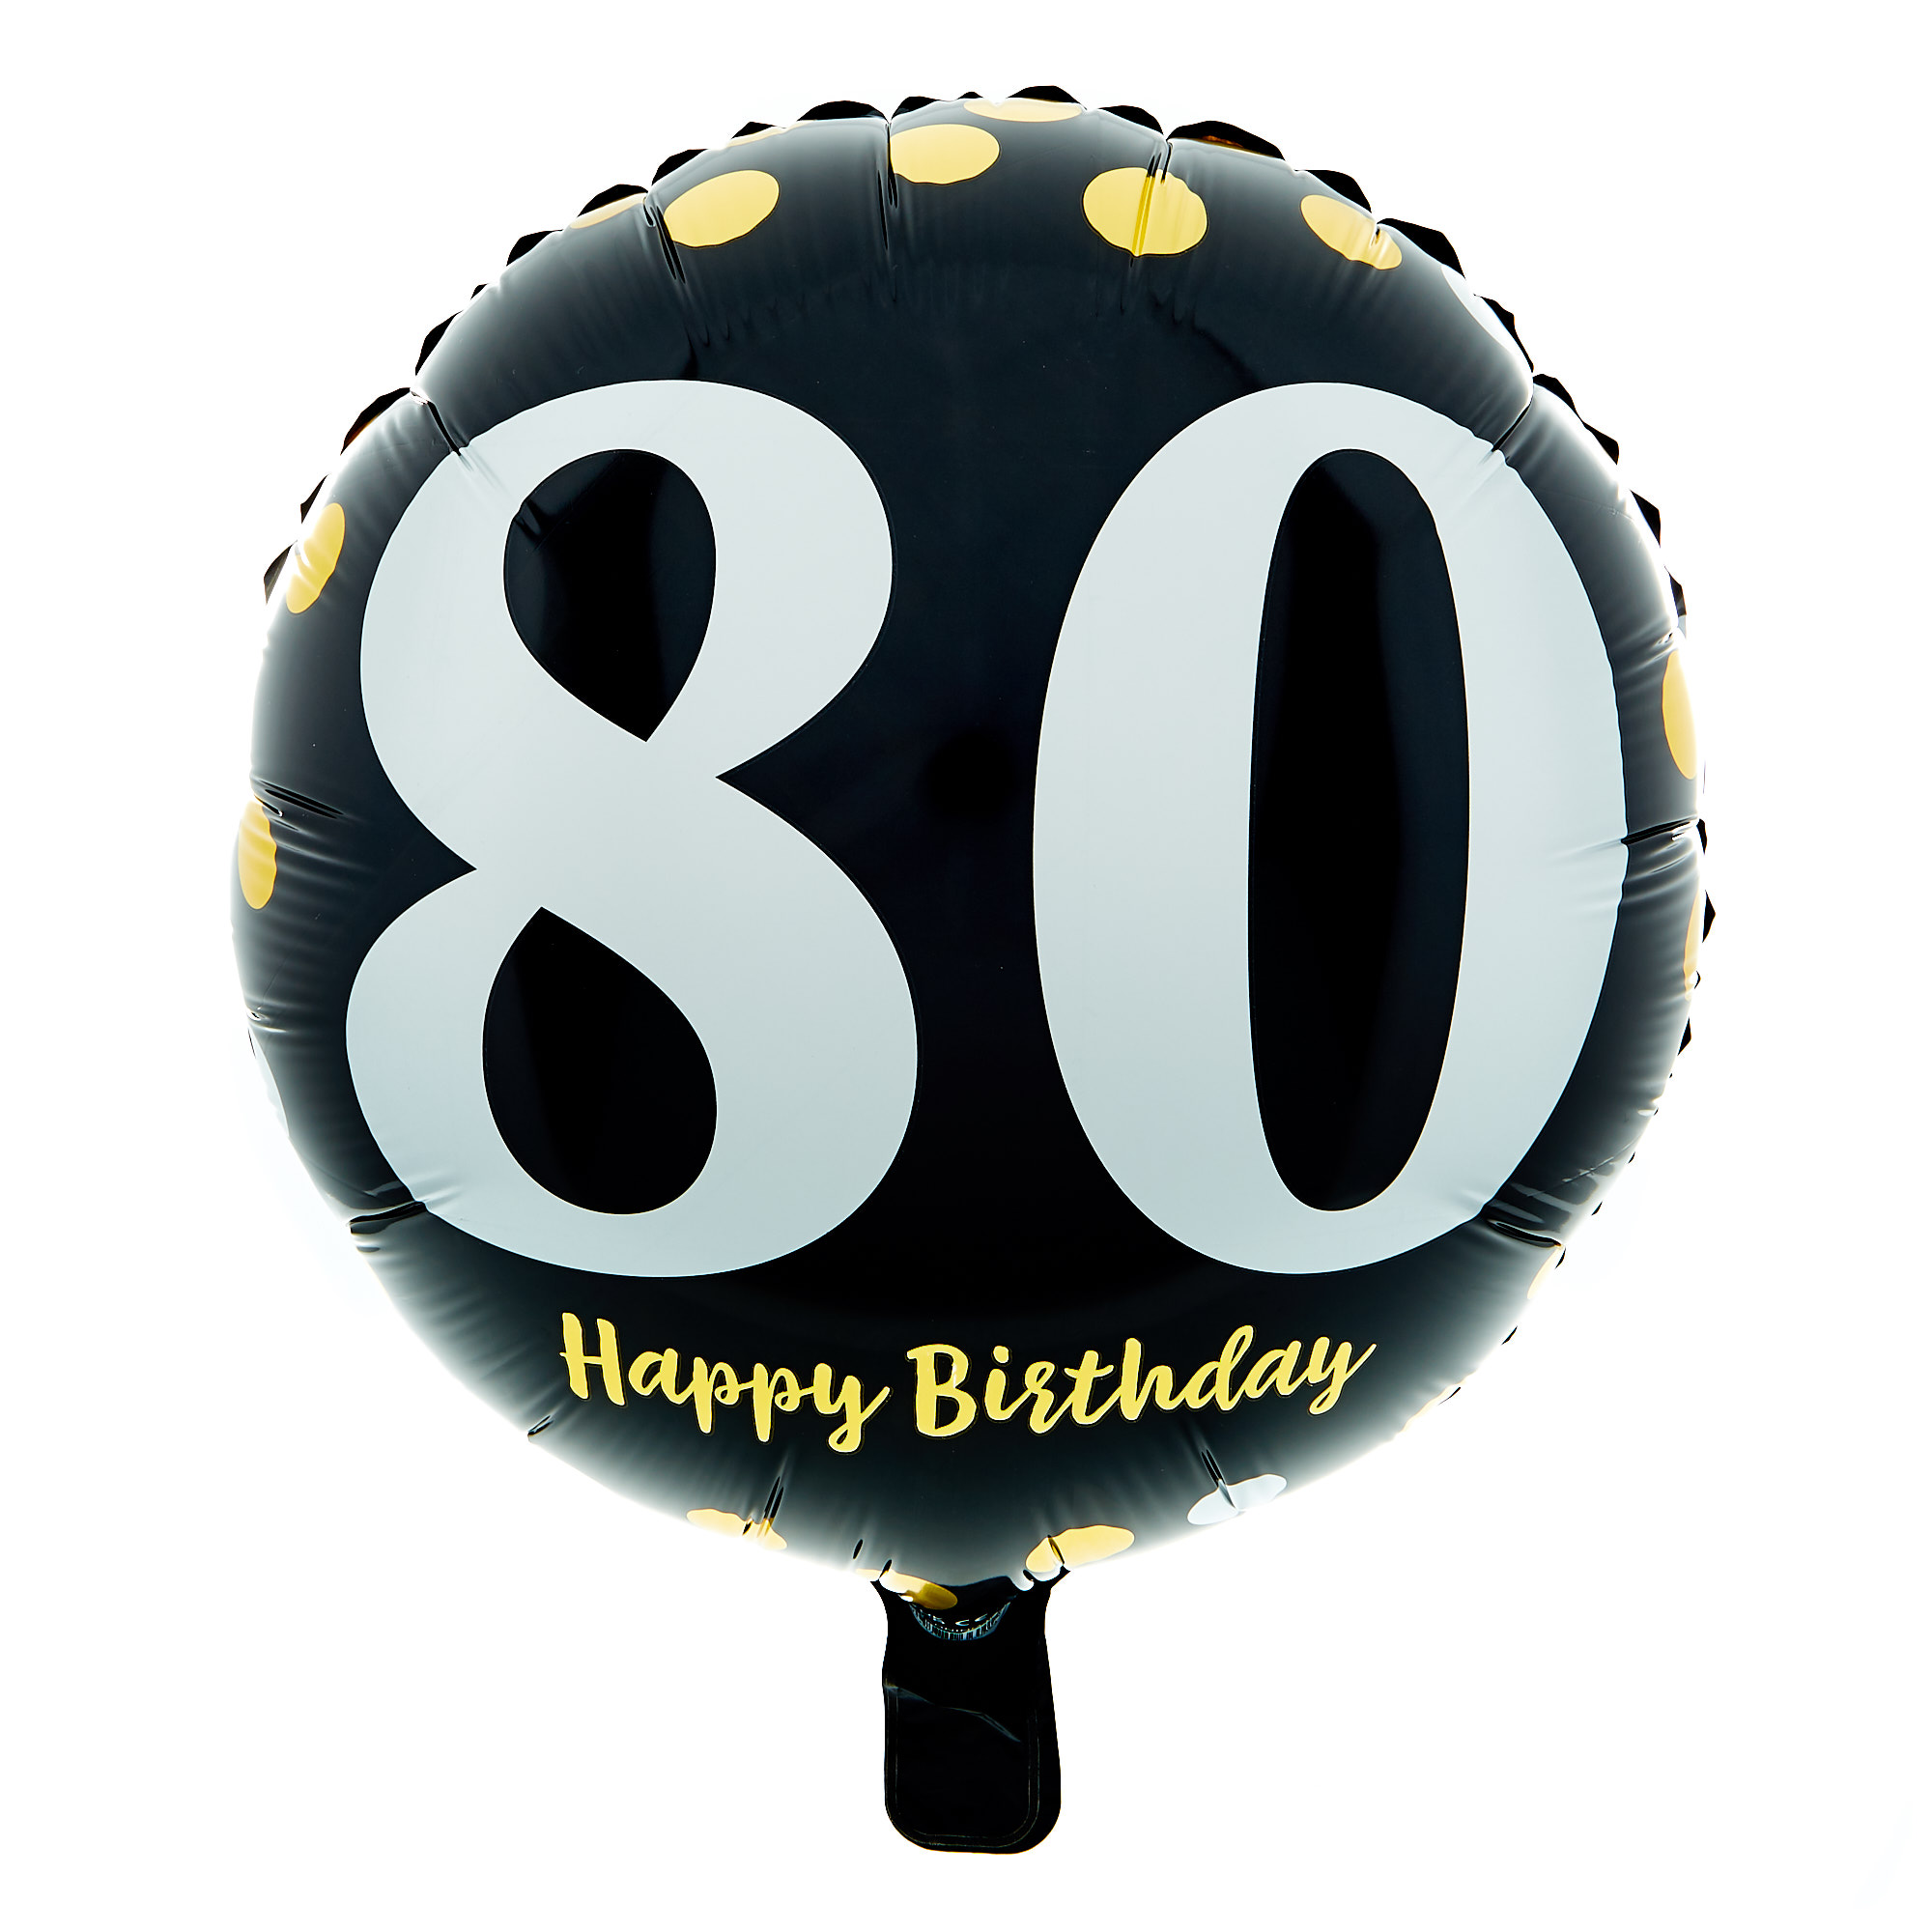 Happy 80th Birthday Balloon Bouquet - DELIVERED INFLATED!